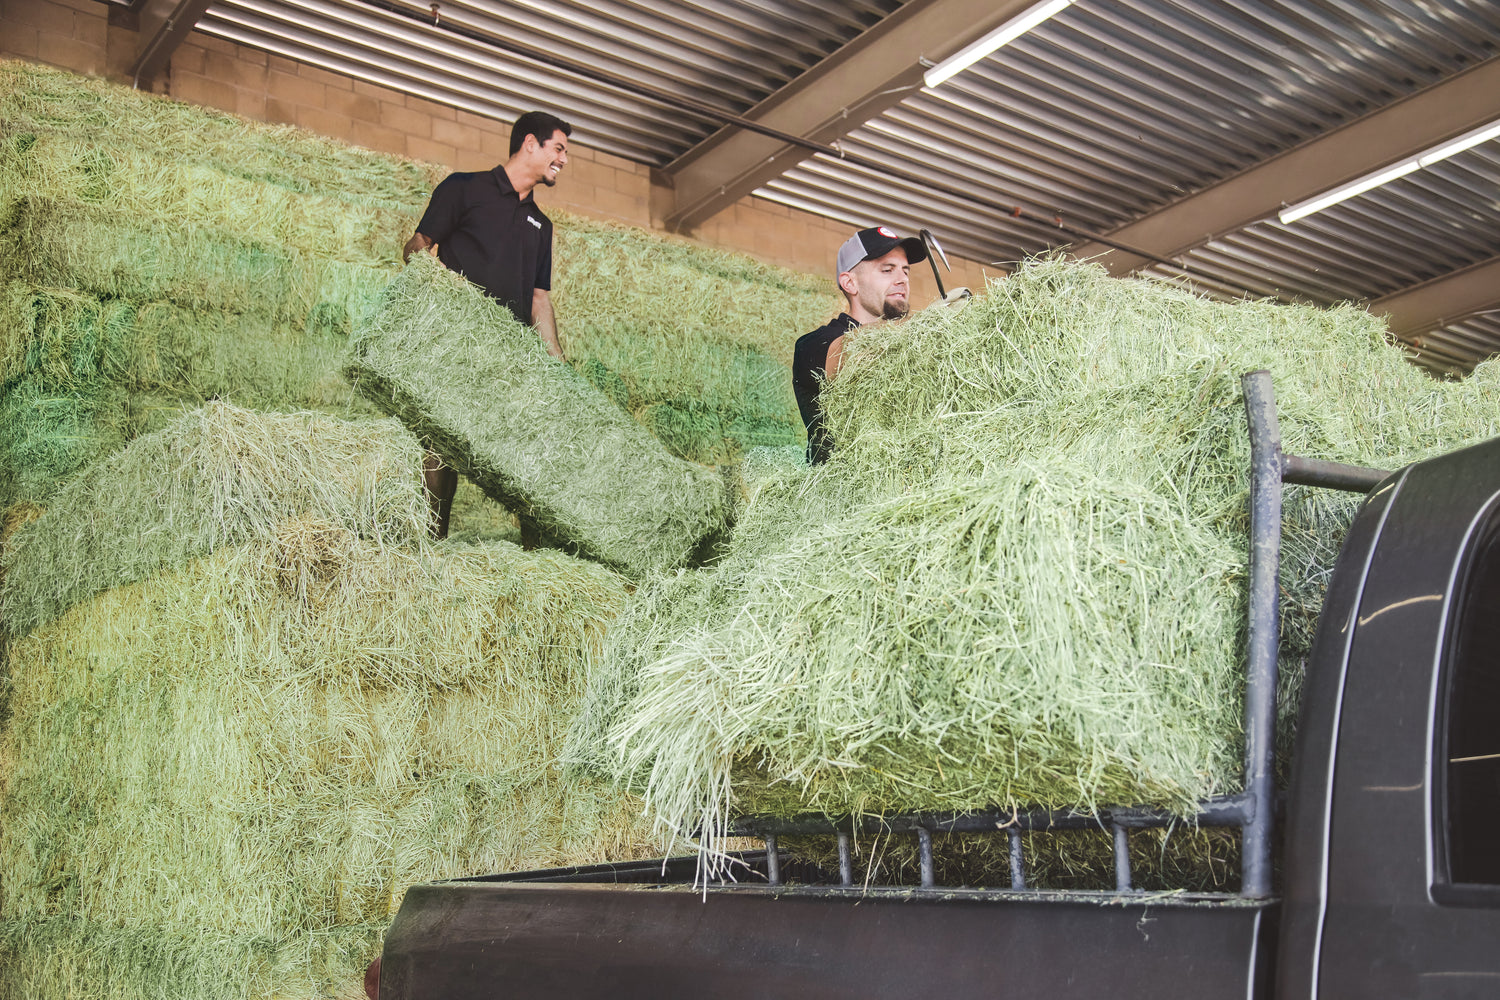 Two Kahoots employees loading hay into the back of a truck